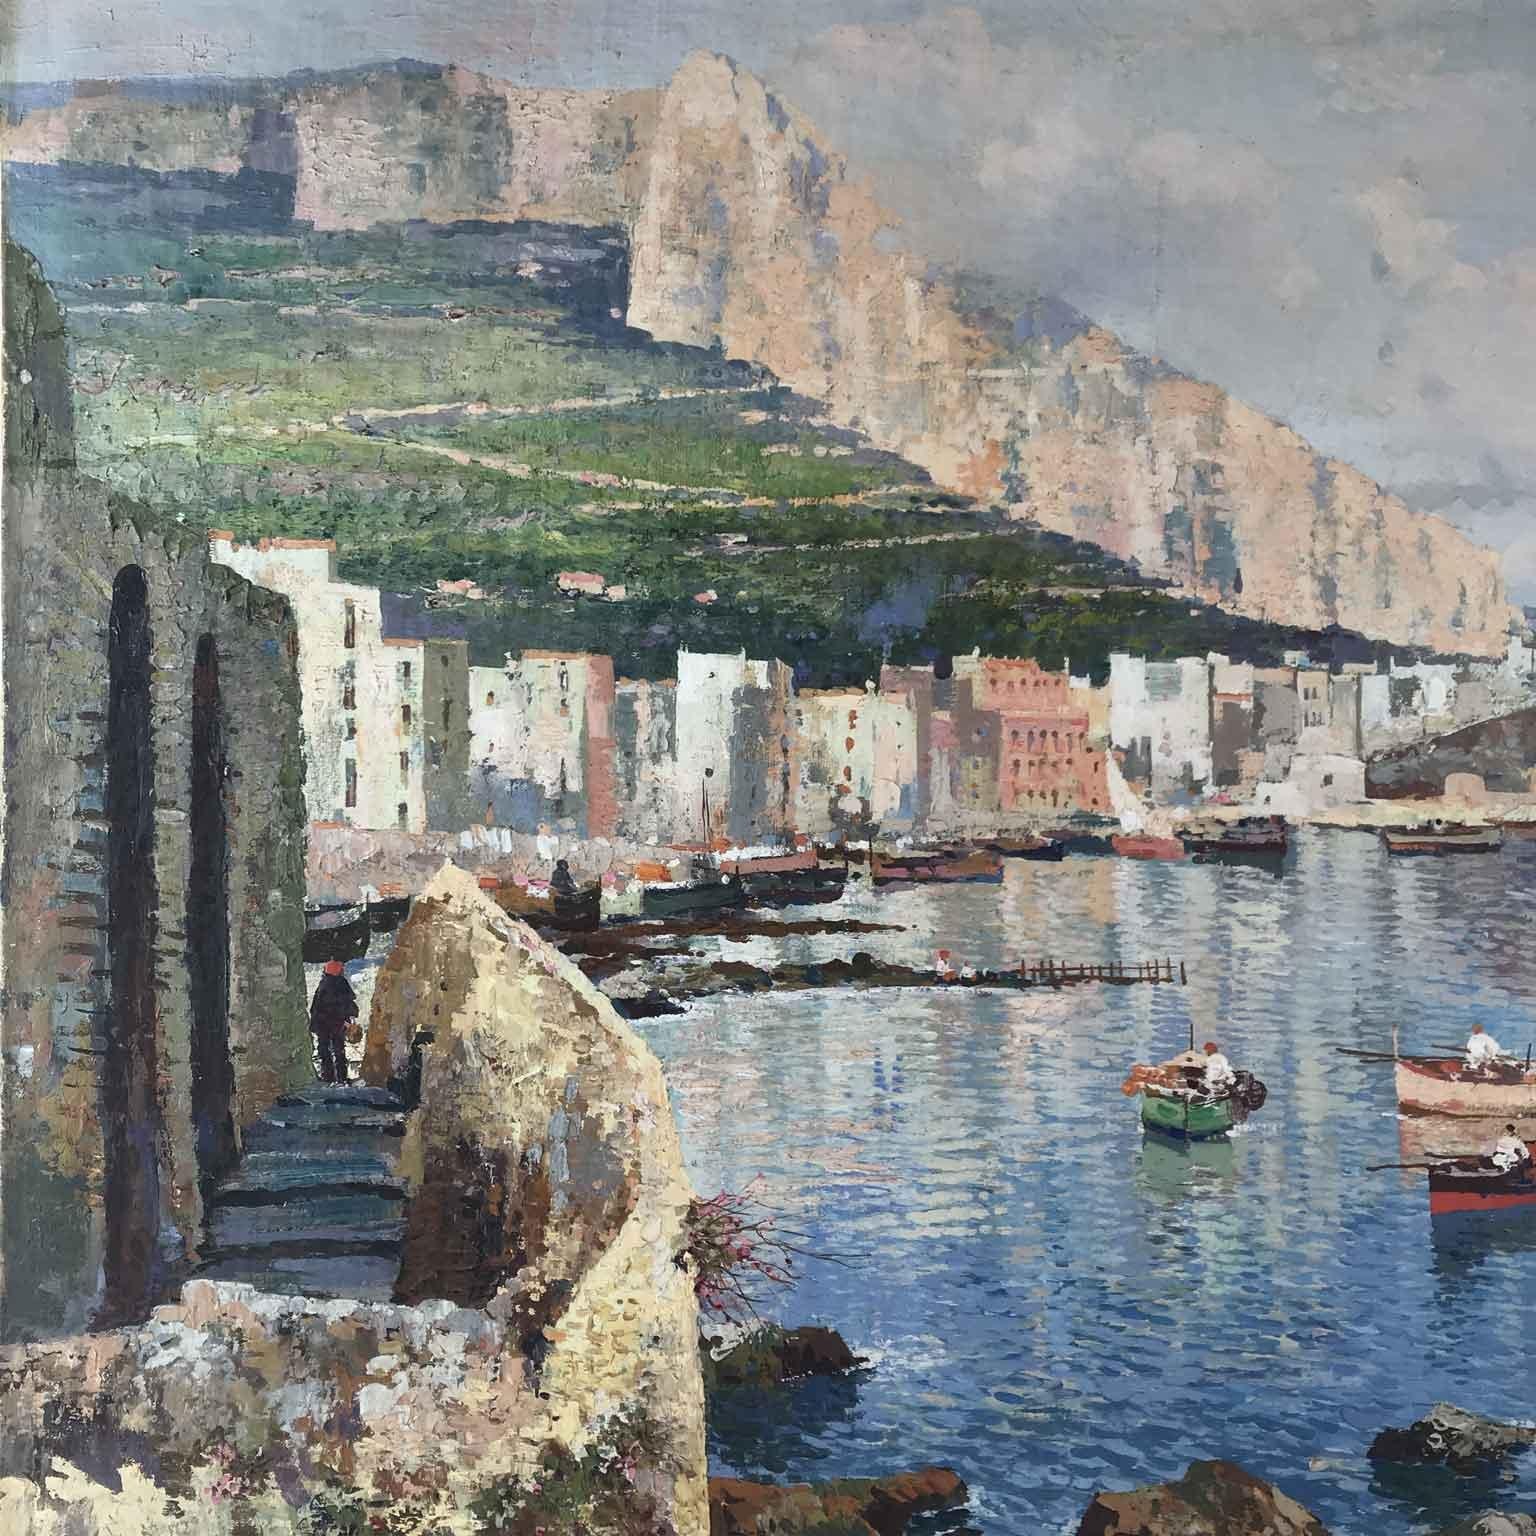 Italian Coastal Landscape oil on canvas work signed and dated lower left by the Italian artist Fausto Pratella 1920 Napoli.

Unframed, this Italian Neapolitan view, this bright marine landscape with fisherboats comes from a Milanese private